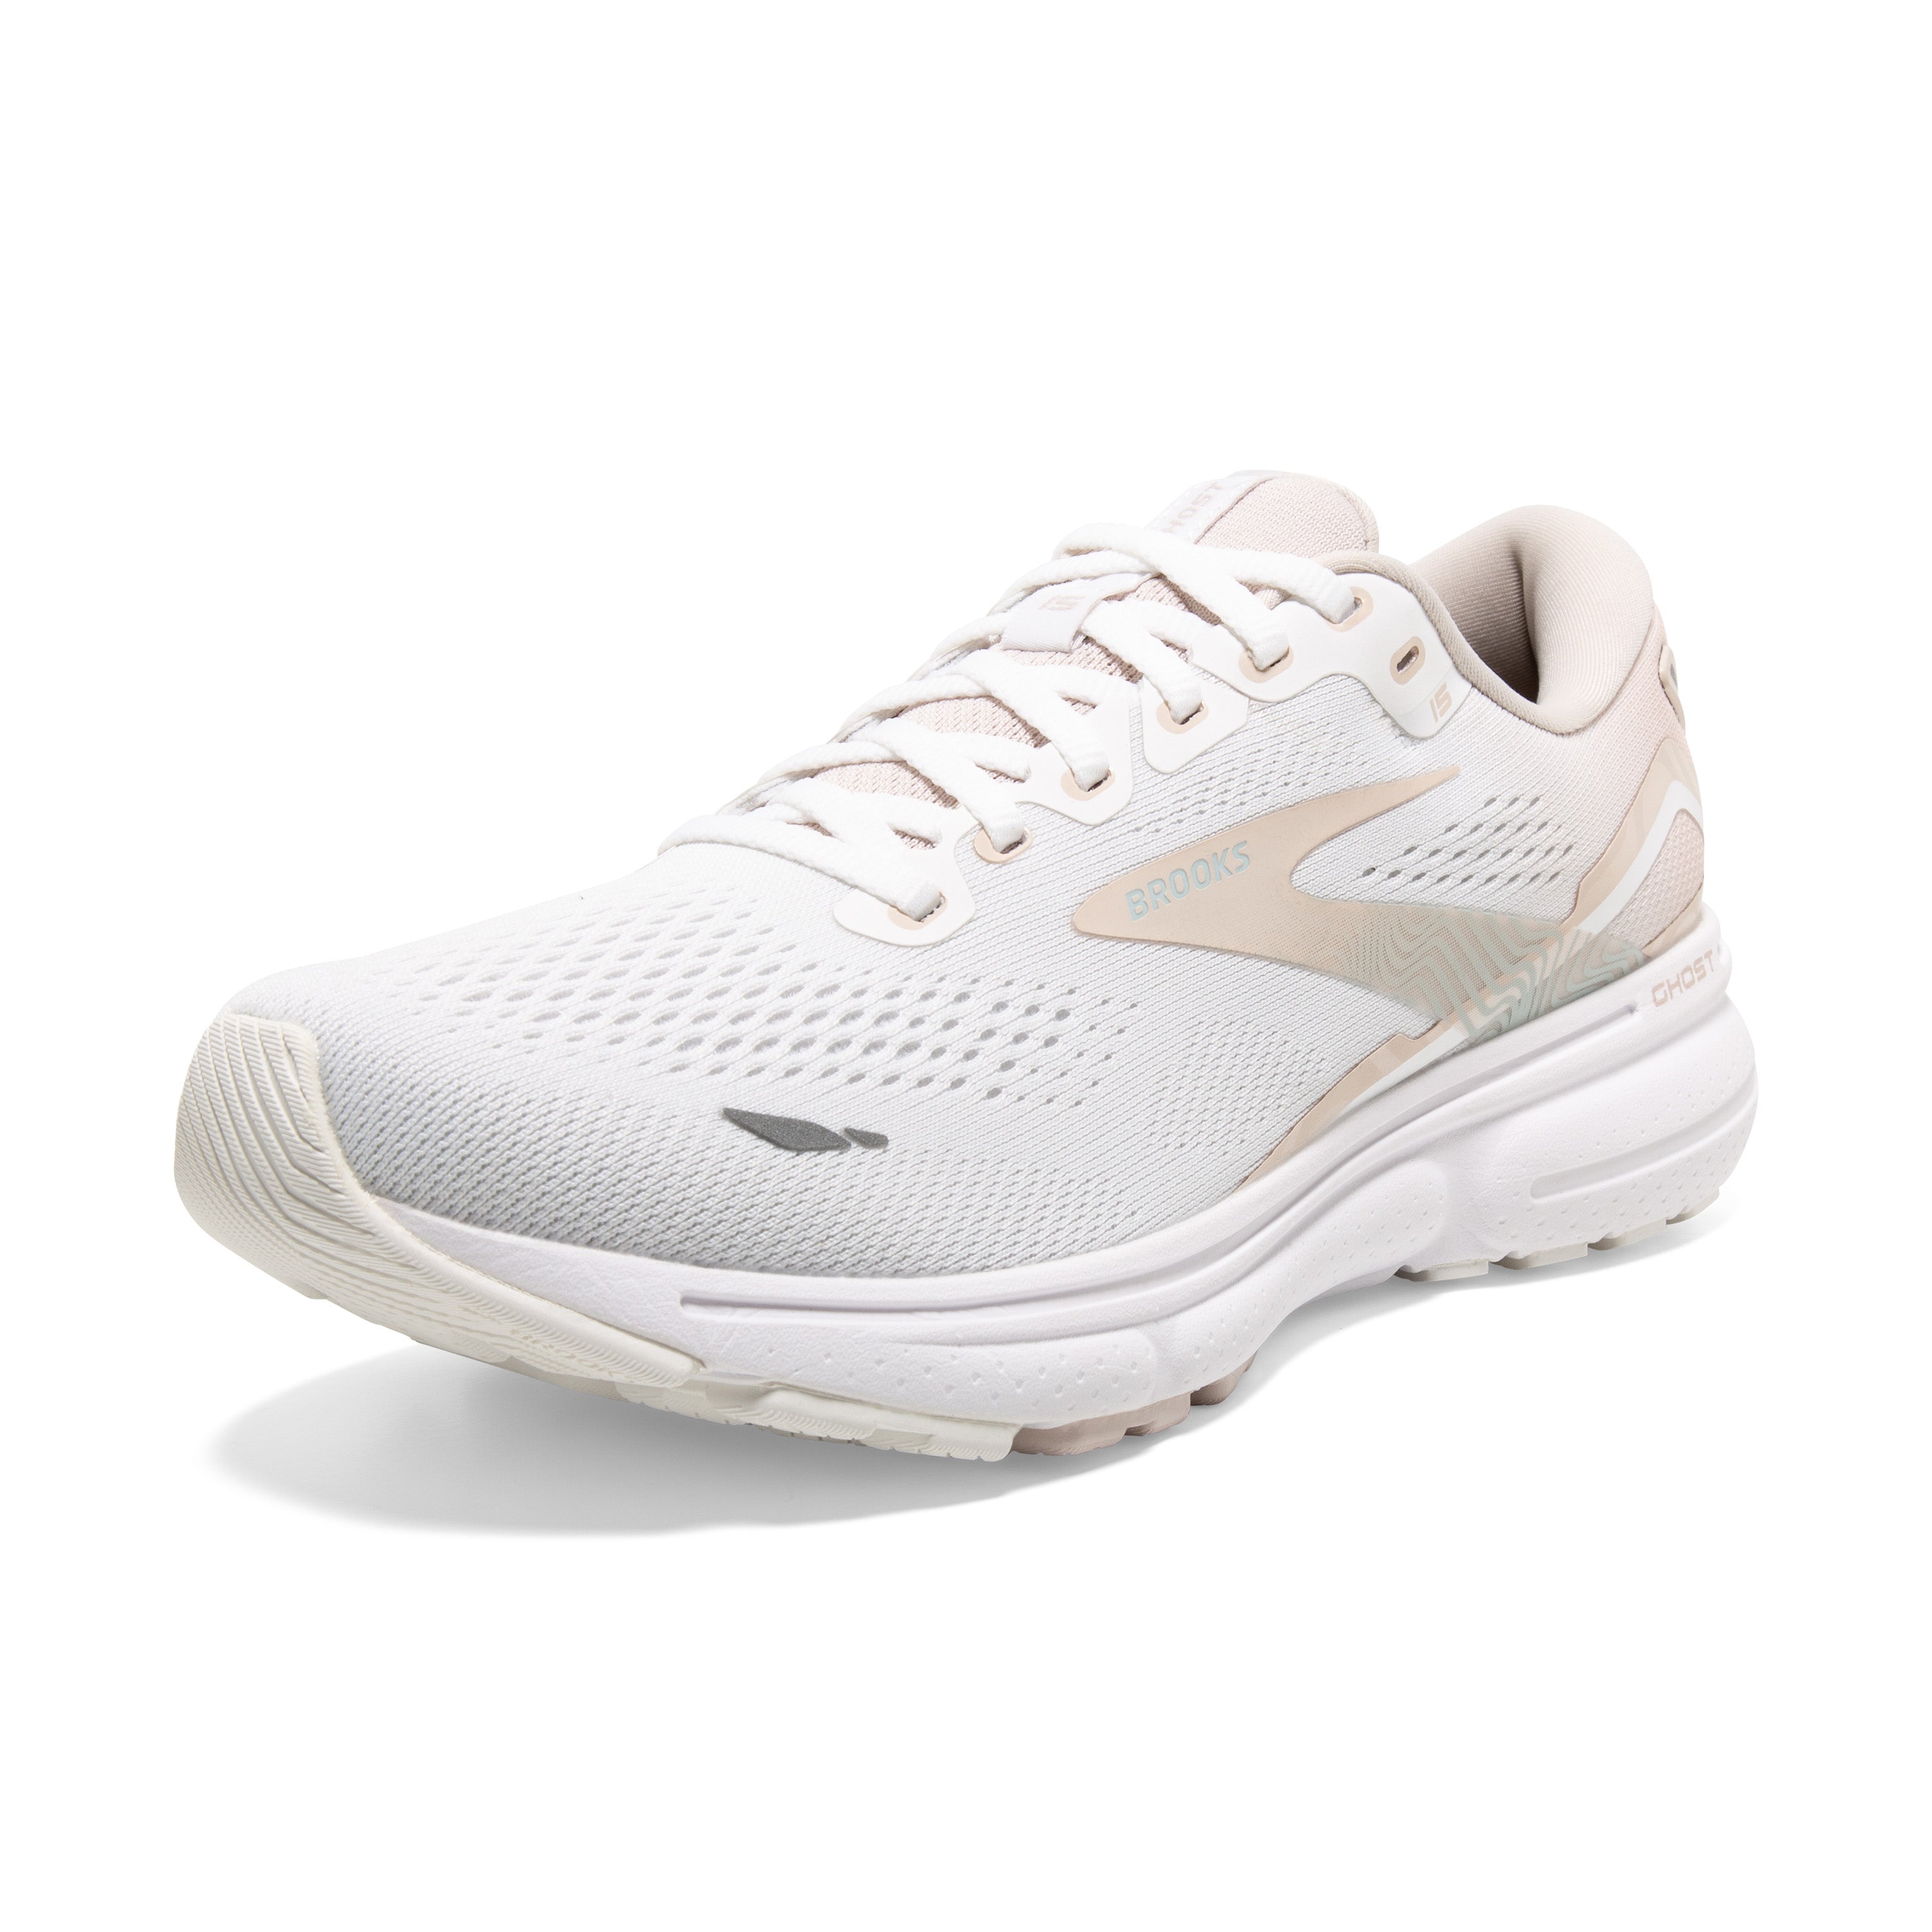 Ghost 15 Women's Running Shoes